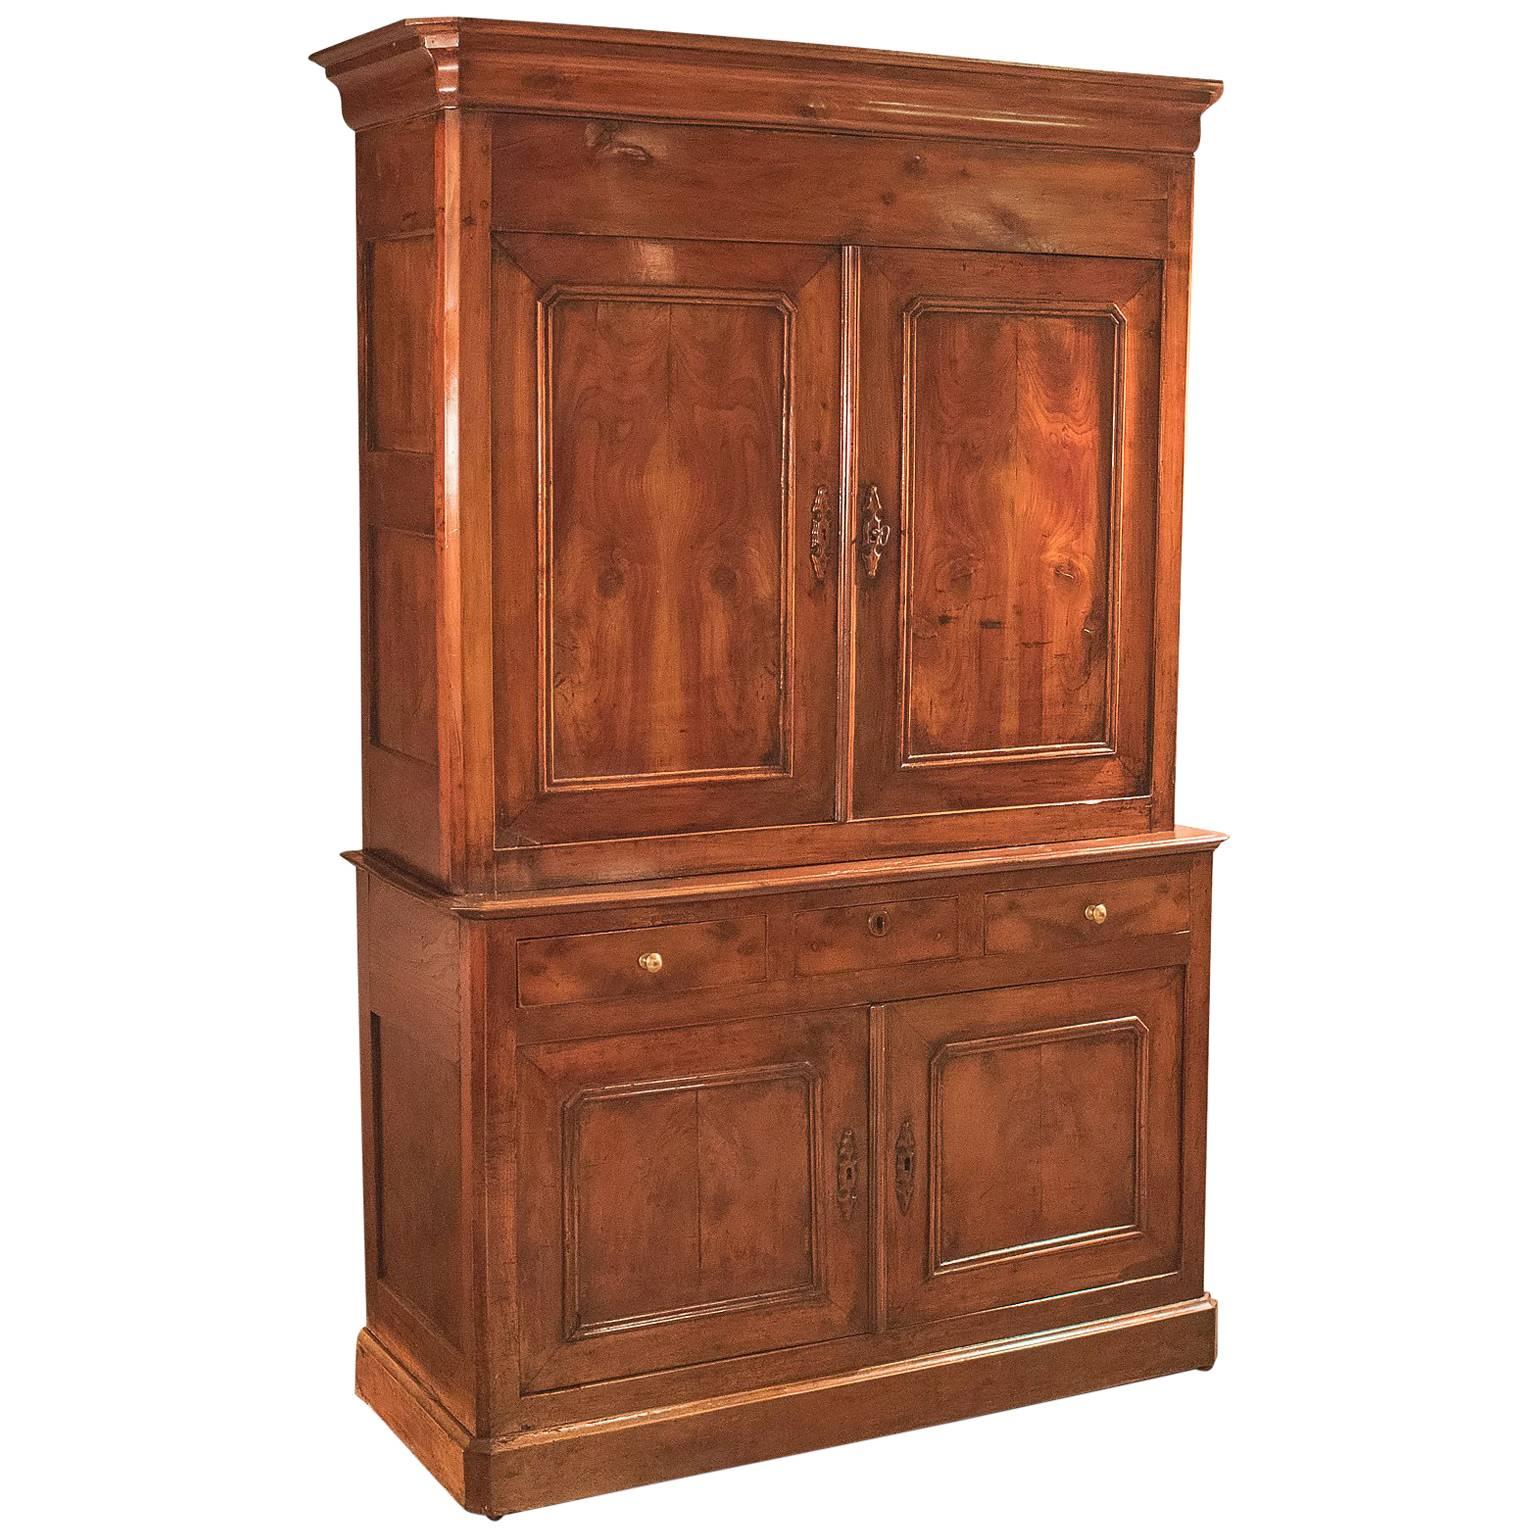 Antique House Keepers Cupboard, French Buffet A Deux Corps, Yew Wood c.1780